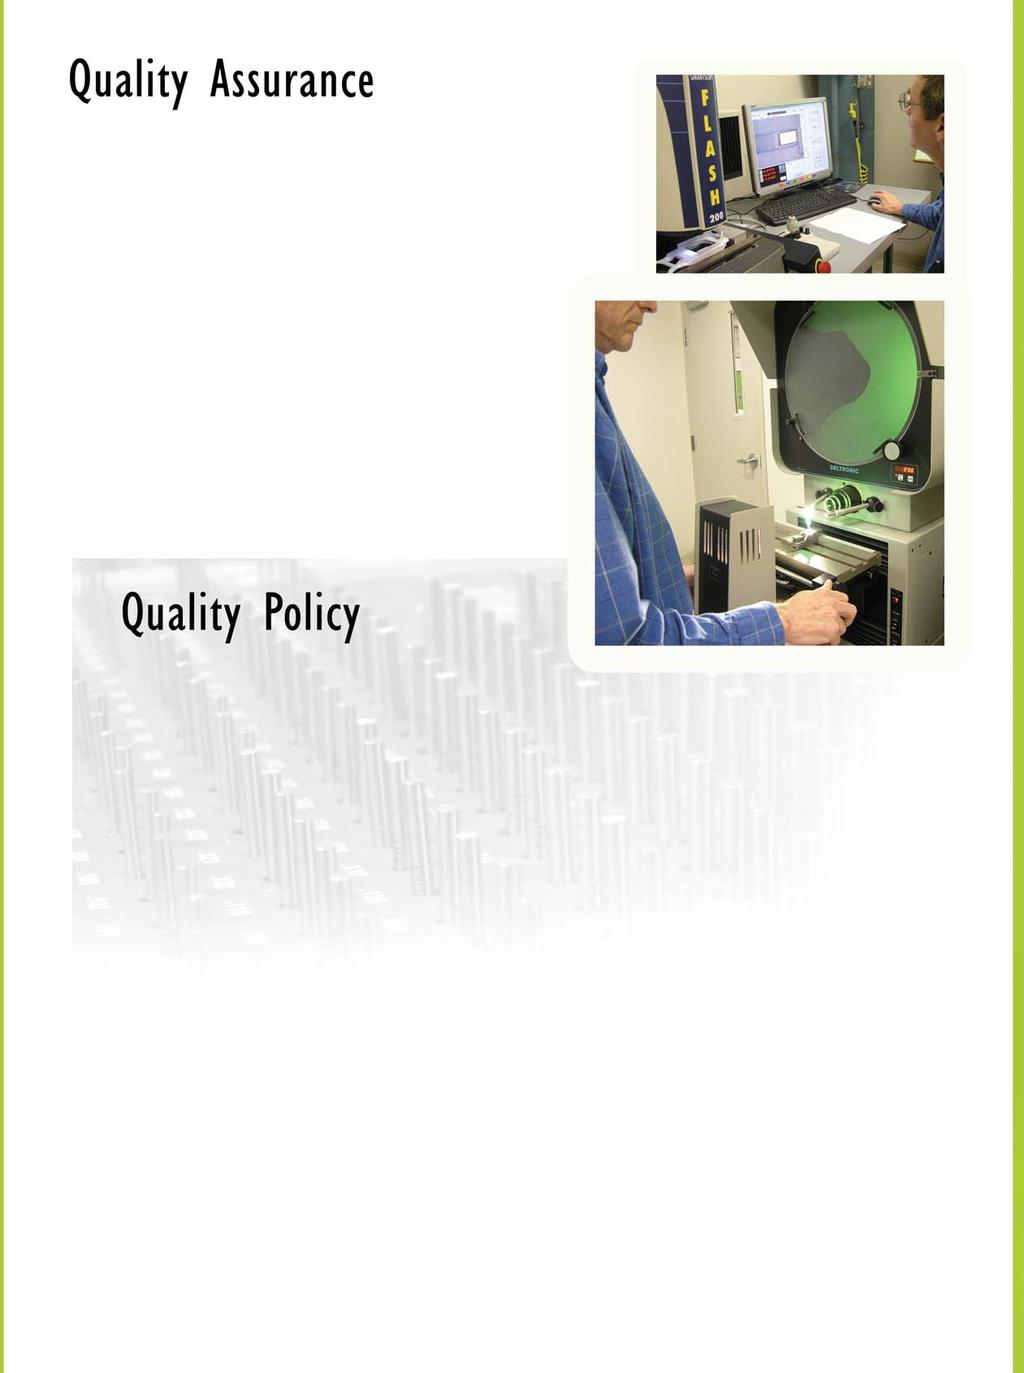 Quality is the foundation of our business and Scan Tool & Mold takes it very seriously.